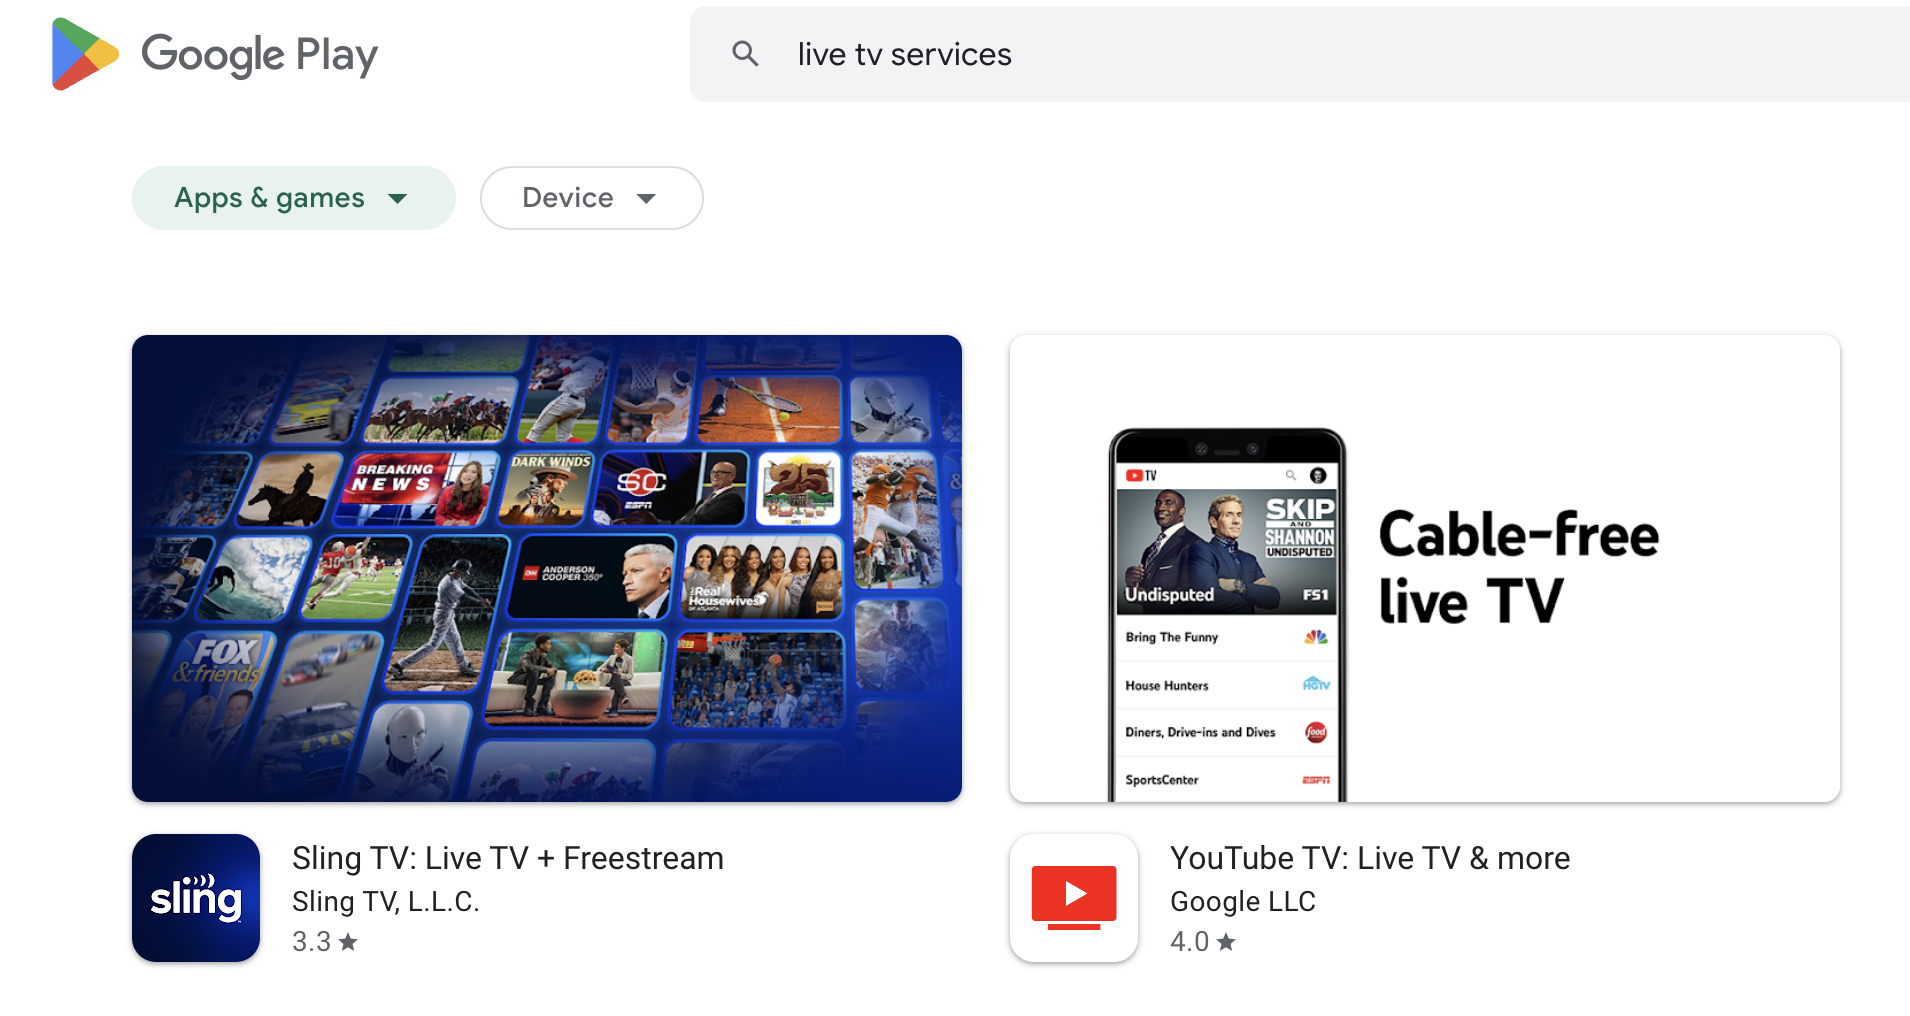 Verified IPTV Services in Google Play